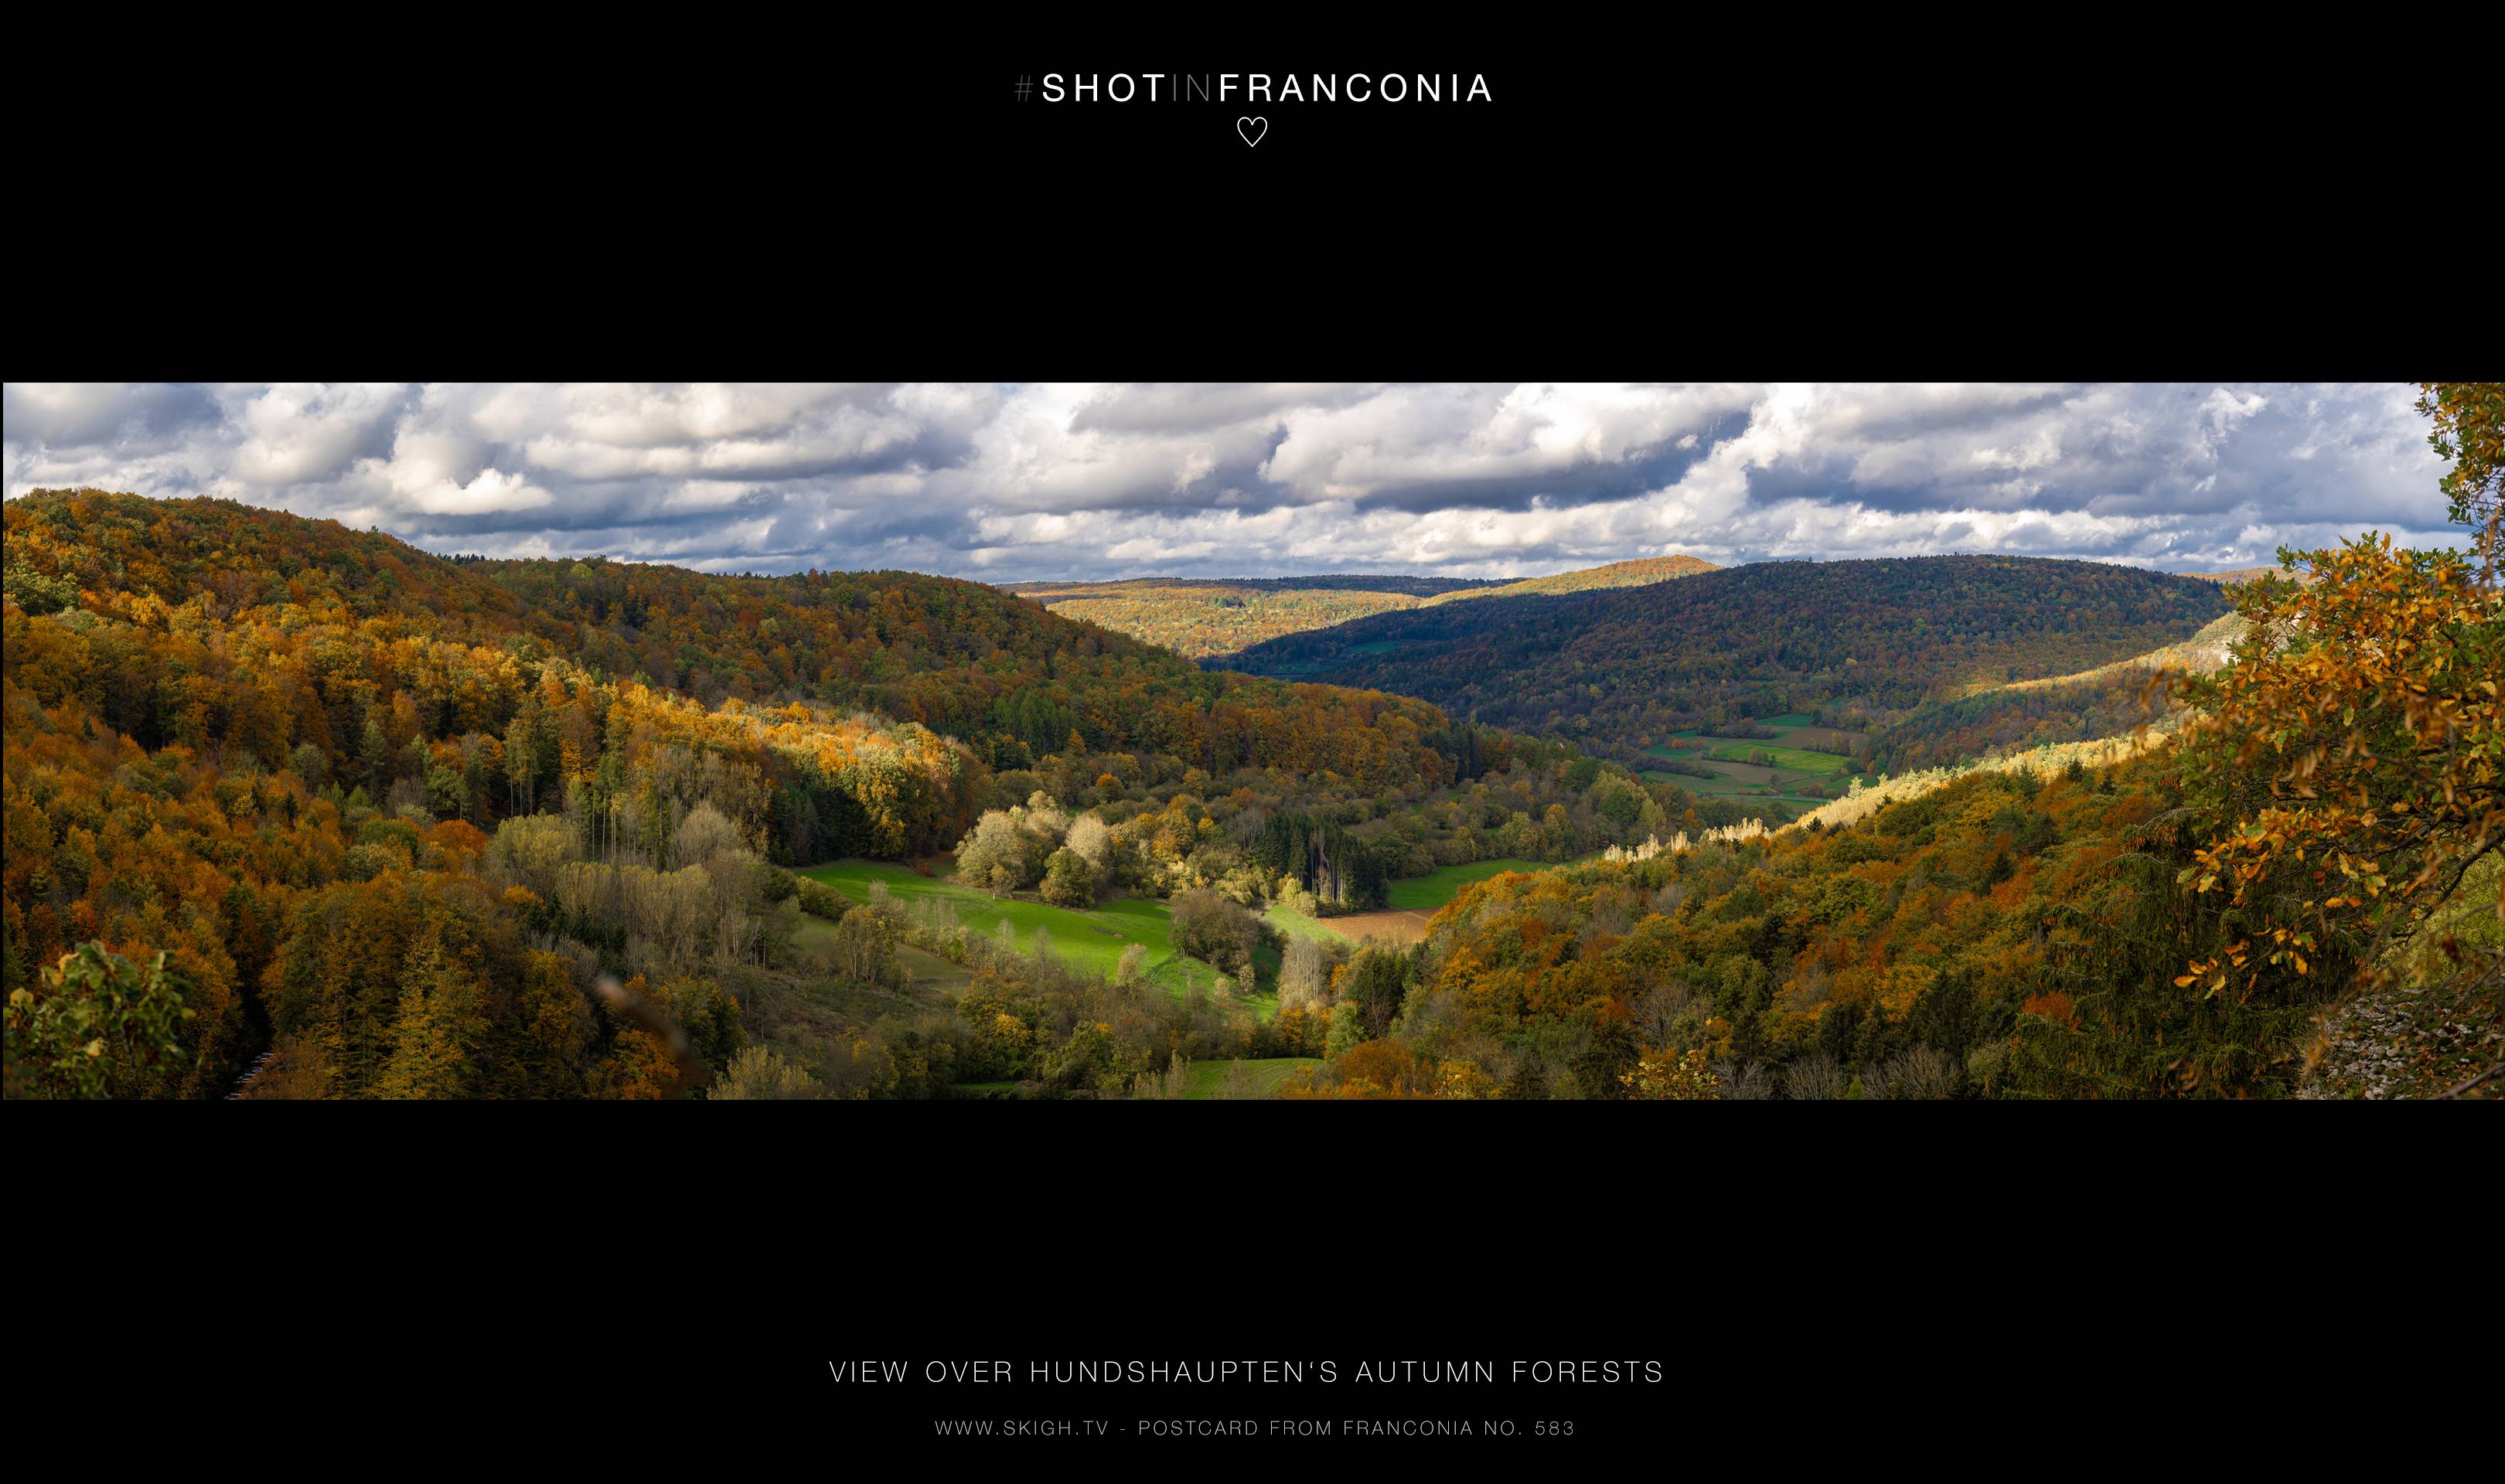 View over Hundshaupten's autumn forests